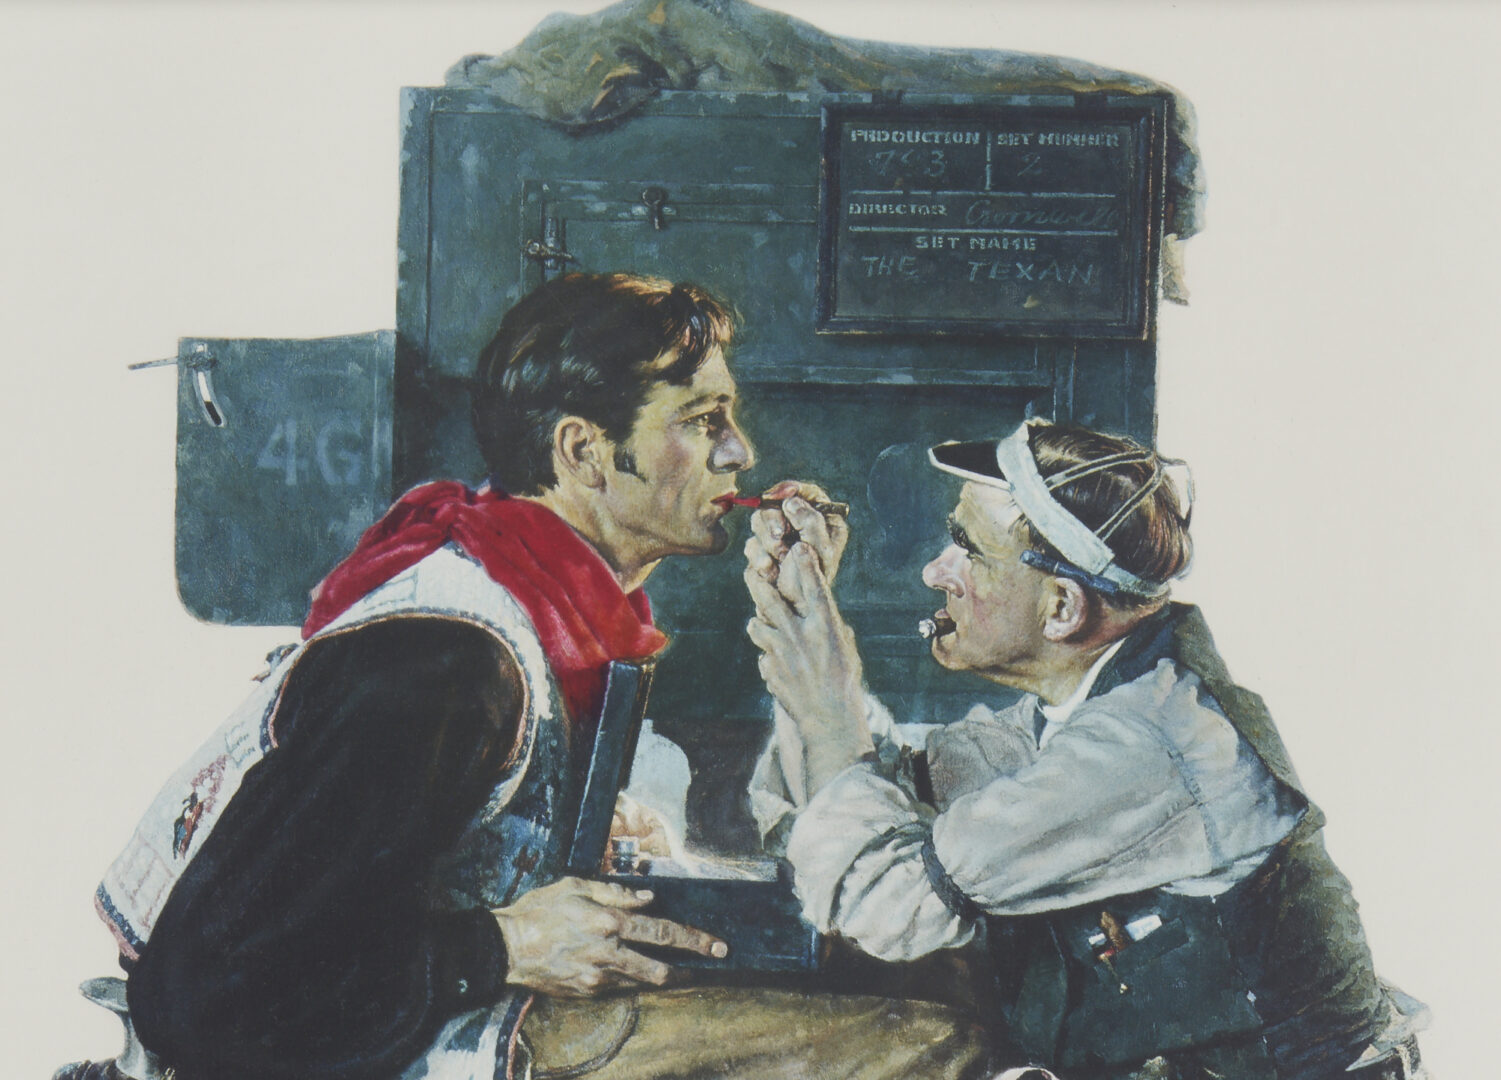 Lot 342: 2 Norman Rockwell Prints: The Texan, Signed Lithograph, & Freedom of Worship Poster